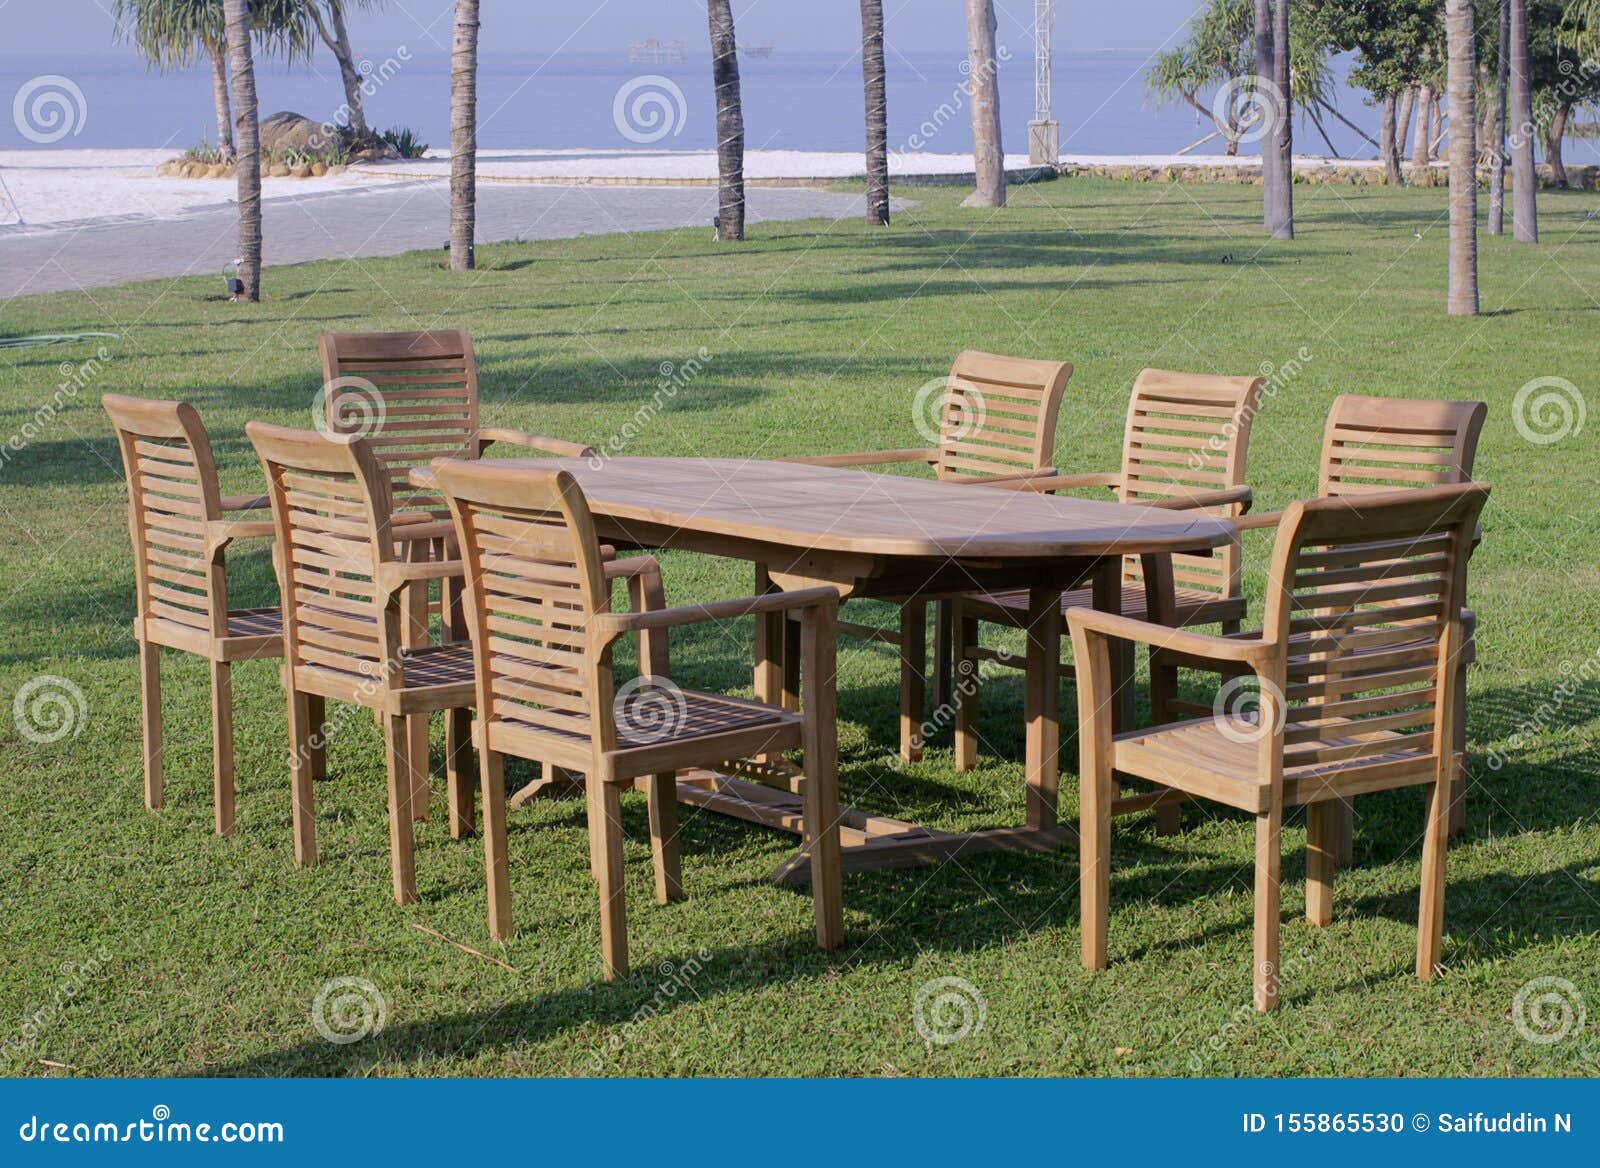 2 091 Teak Outdoor Furniture Photos Free Royalty Free Stock Photos From Dreamstime